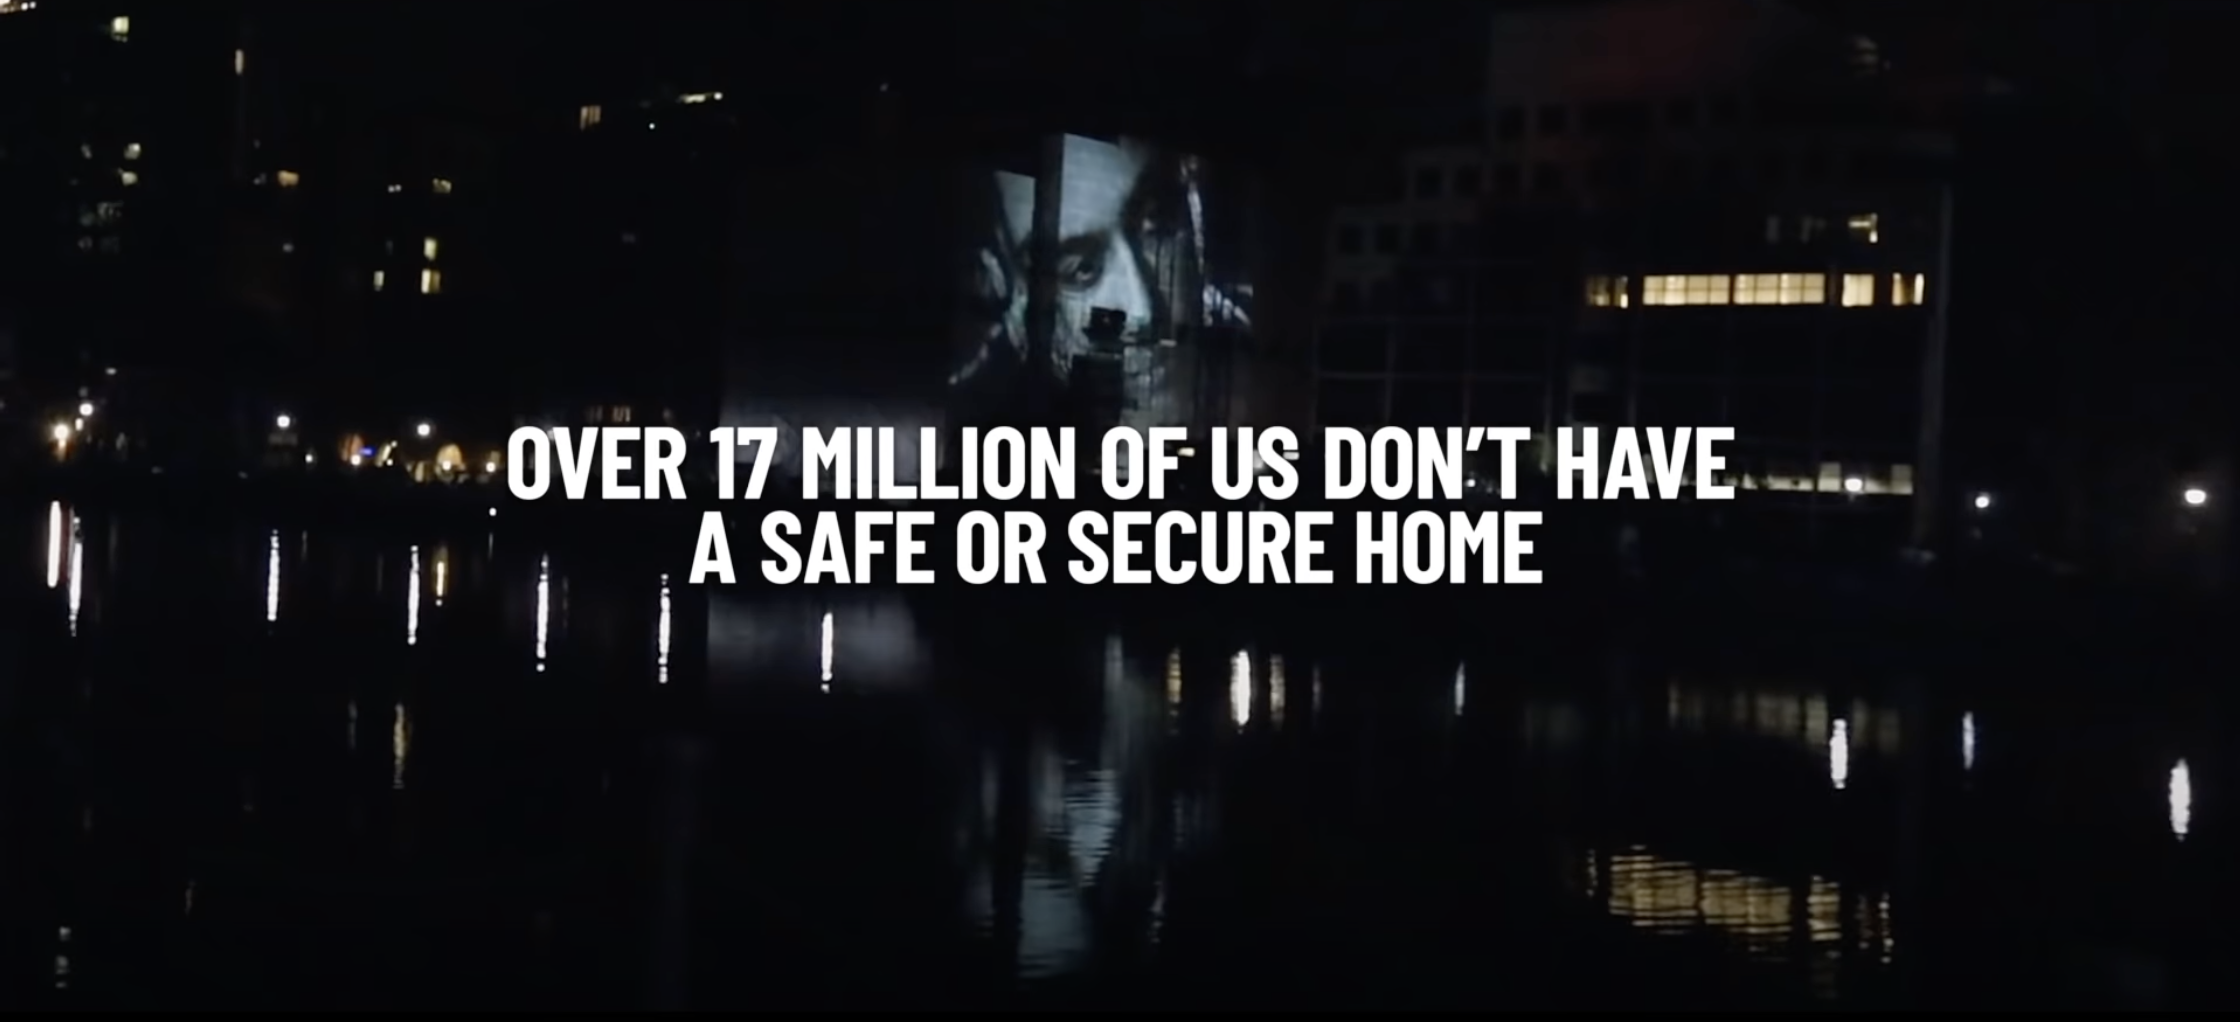 Screen capture of a Shelter video with the super 'Over 17 million of us don't have a safe or secure home'